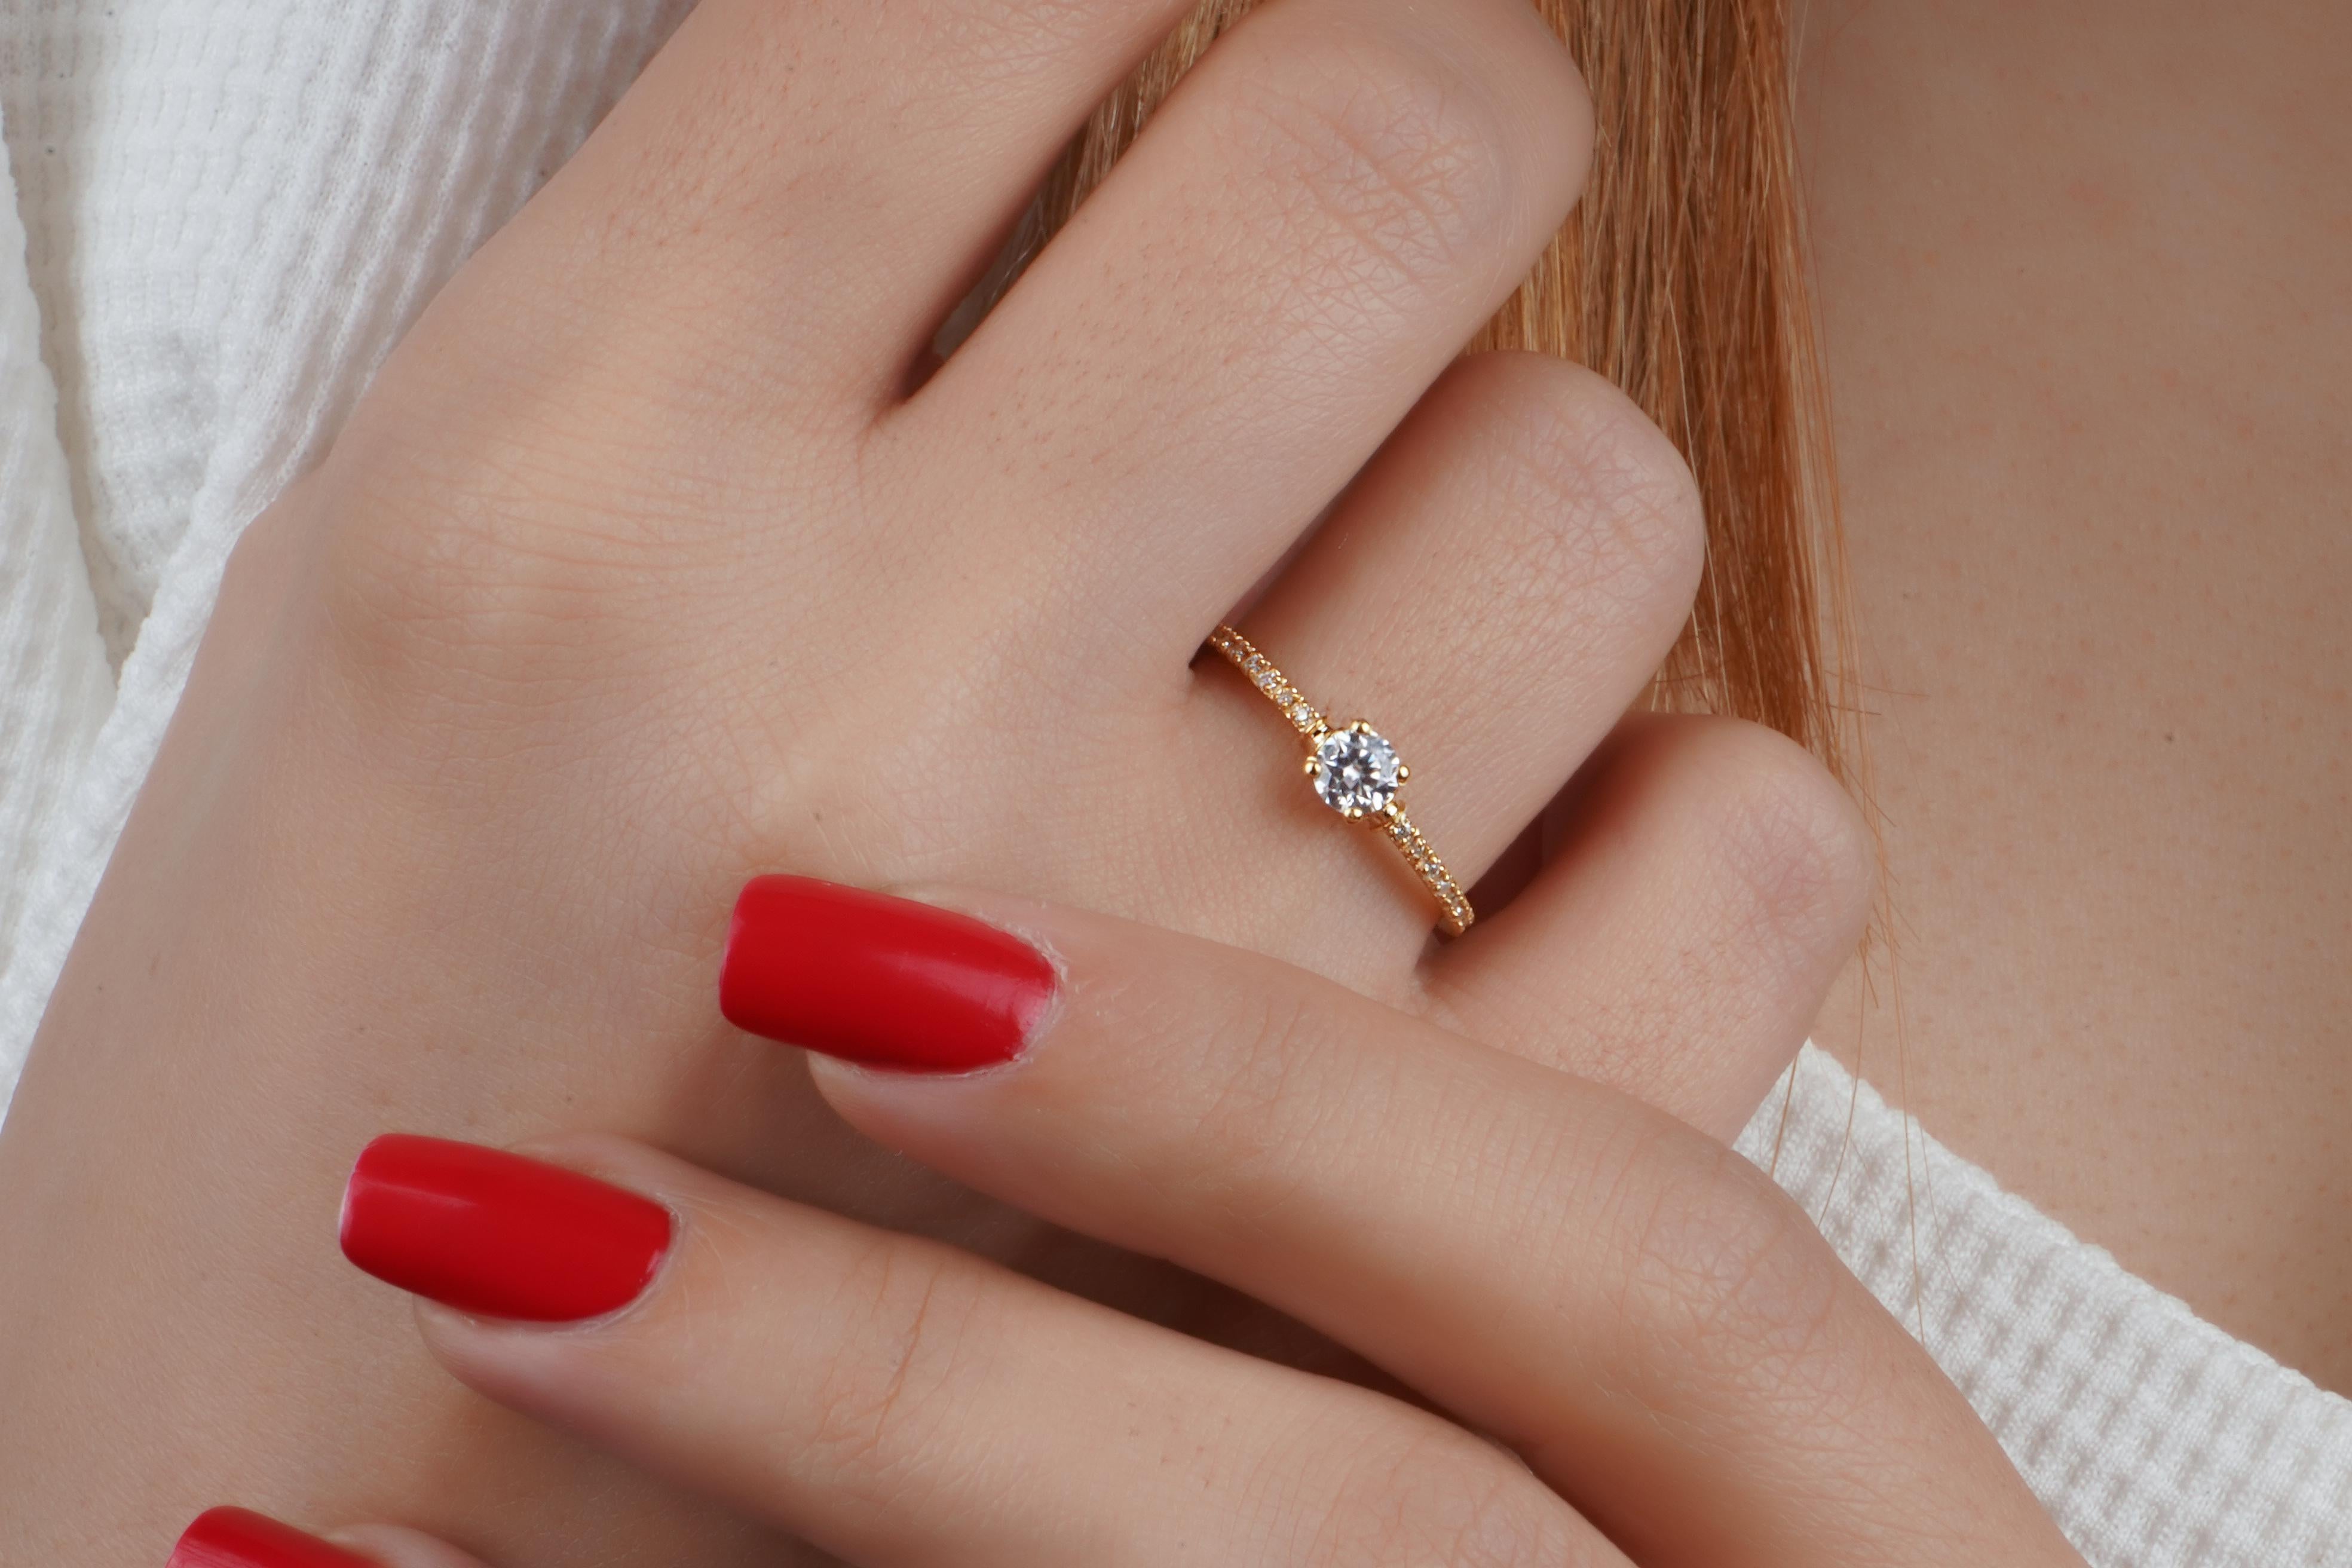 If you are looking for a unique and meaningful gift for yourself or someone special, you will love our 18k gold Endalaus ring with moissanite!

This ring is not just a beautiful accessory, but also a symbol of your personality and values. It is made